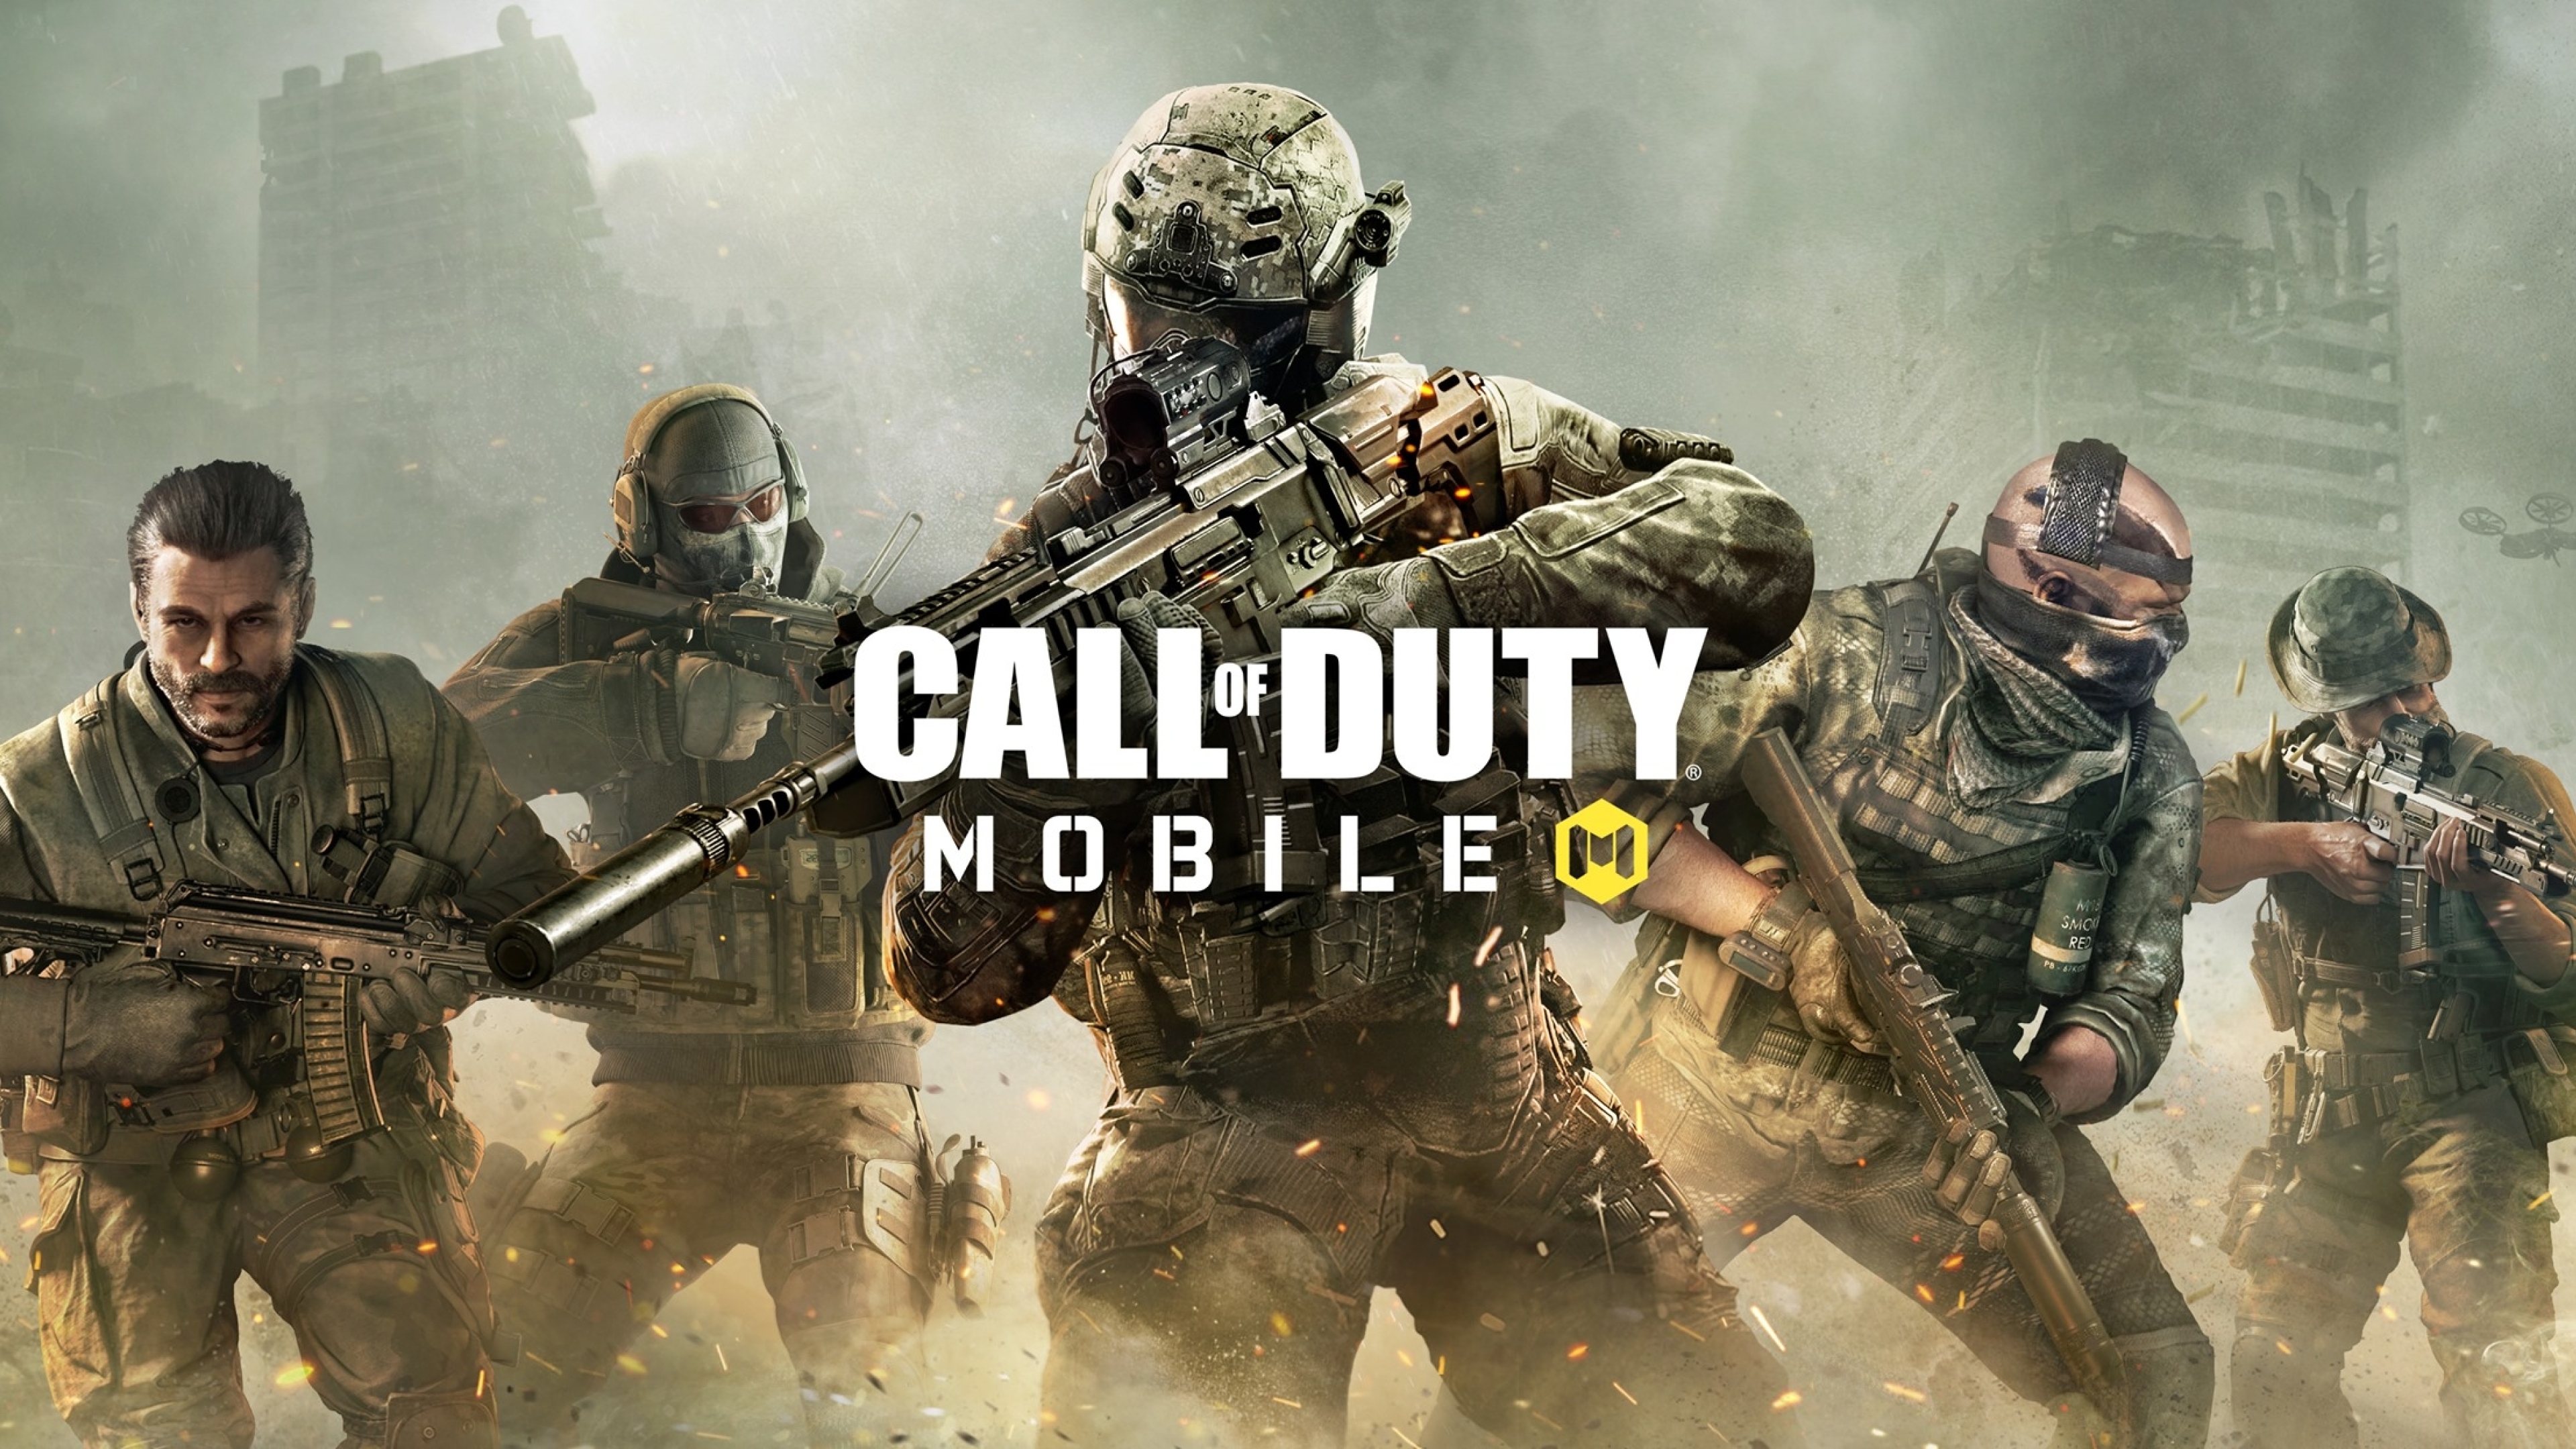 3840x2160 Call Of Duty Mobile Game 4k Wallpaper Hd Games 4k